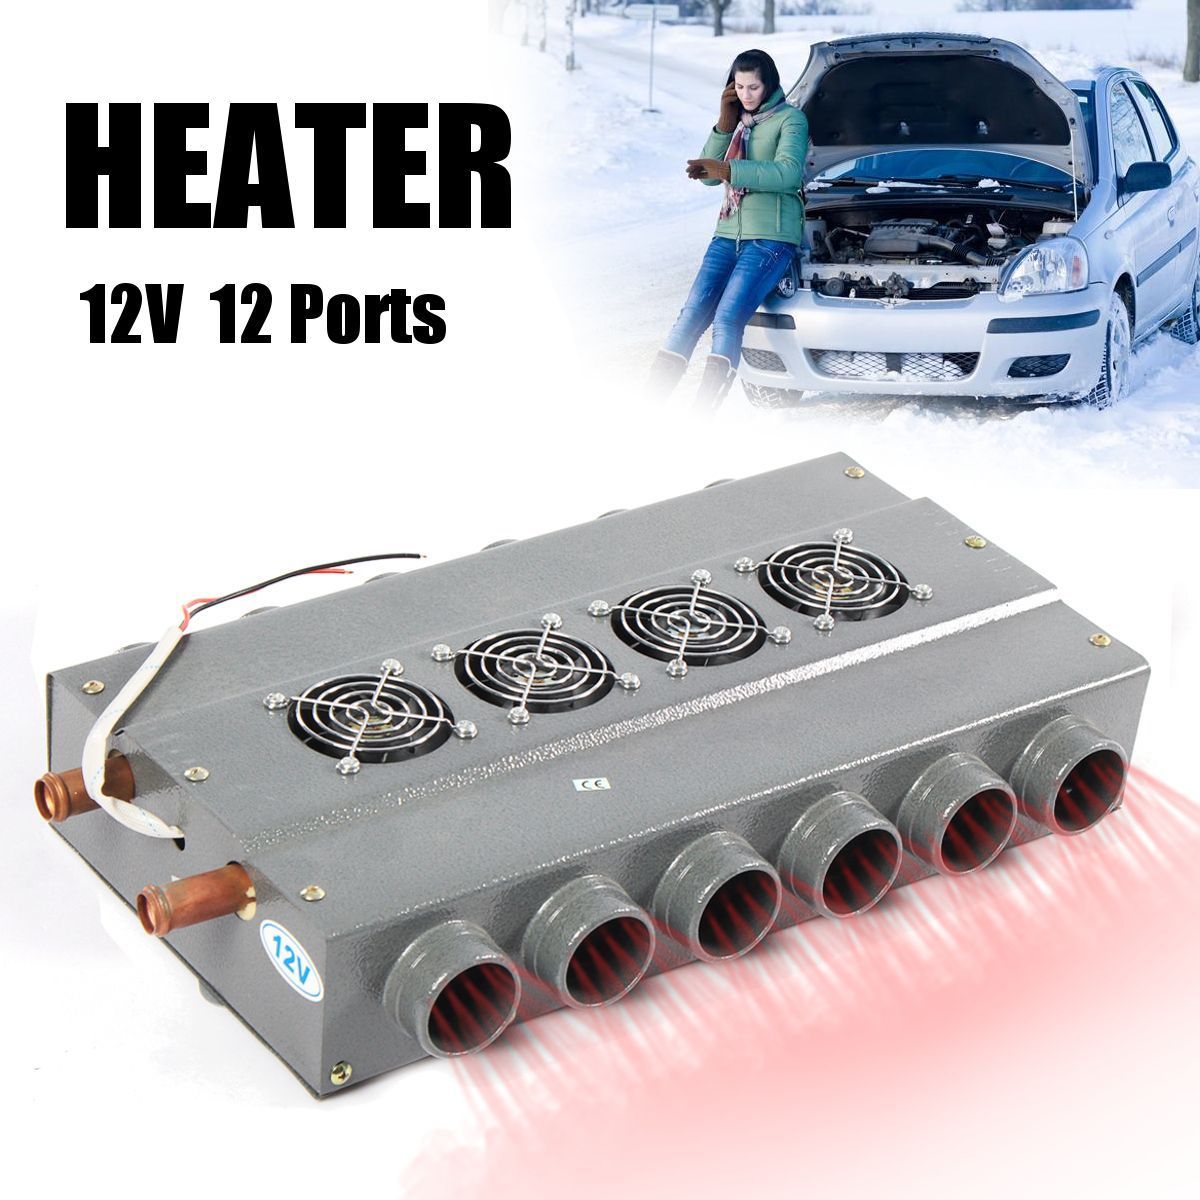 DC-12V-24V-12-Holes-4-Fan-Universal-Heater-Defroster-Double-Side-Compact-For-Car-Truck-1316067